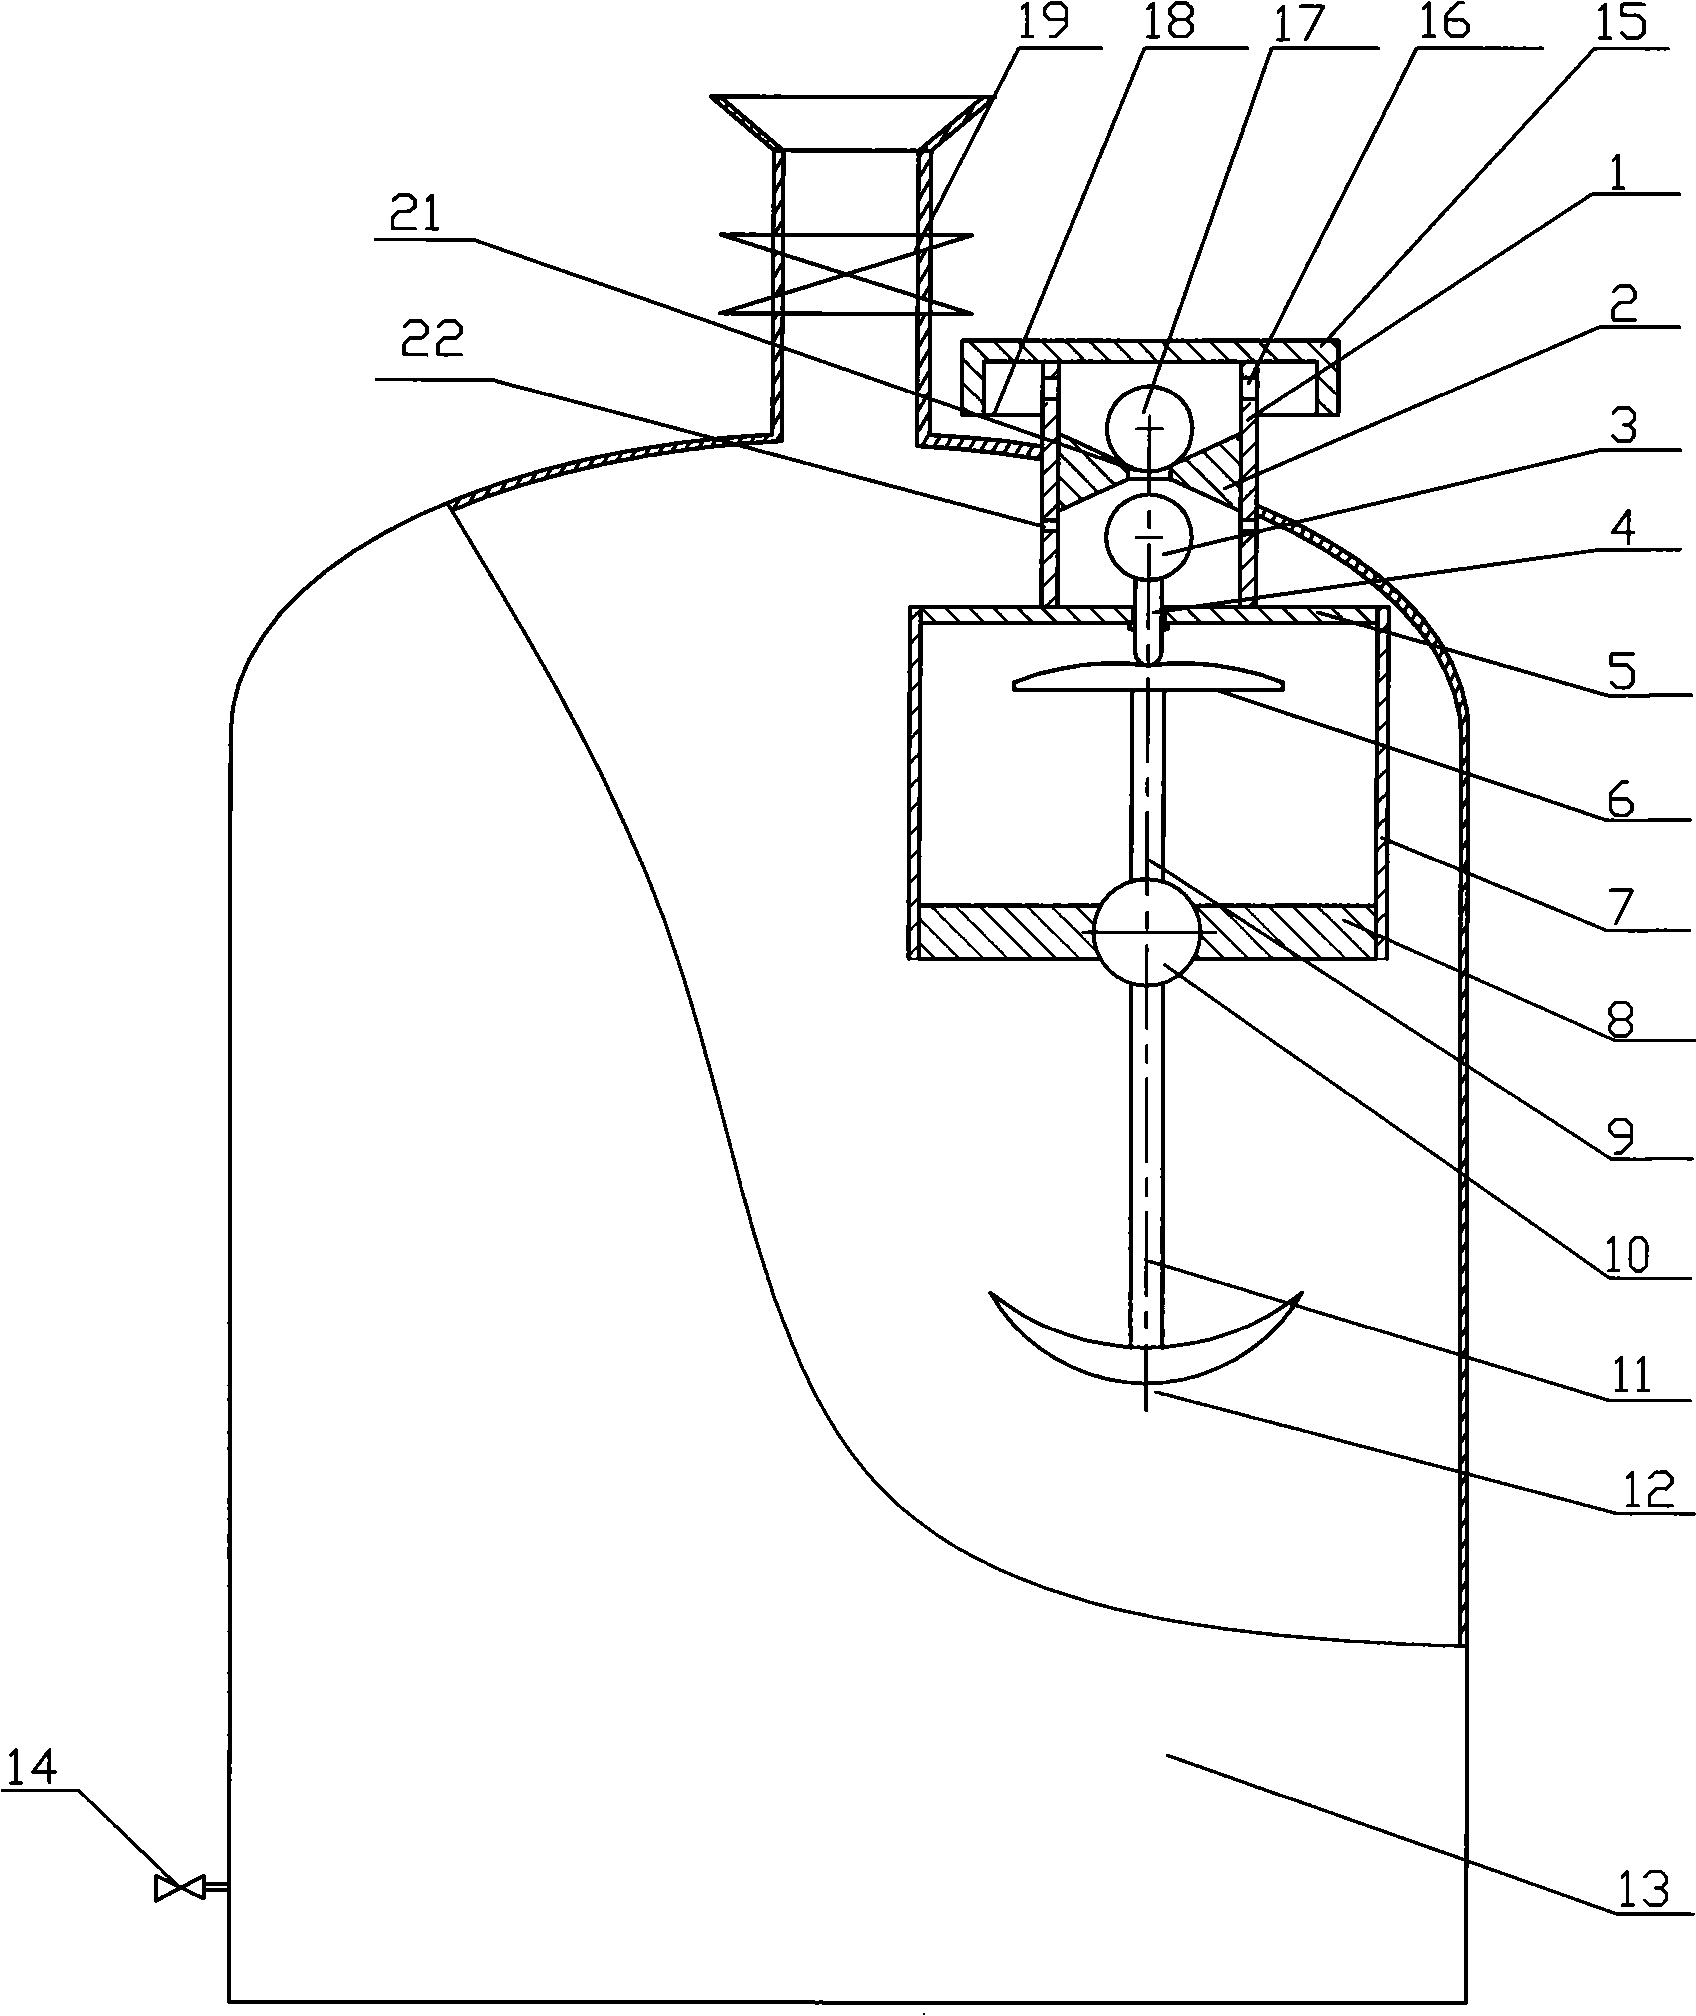 Self-closing valve for preventing liquid overflowing when container is dumped